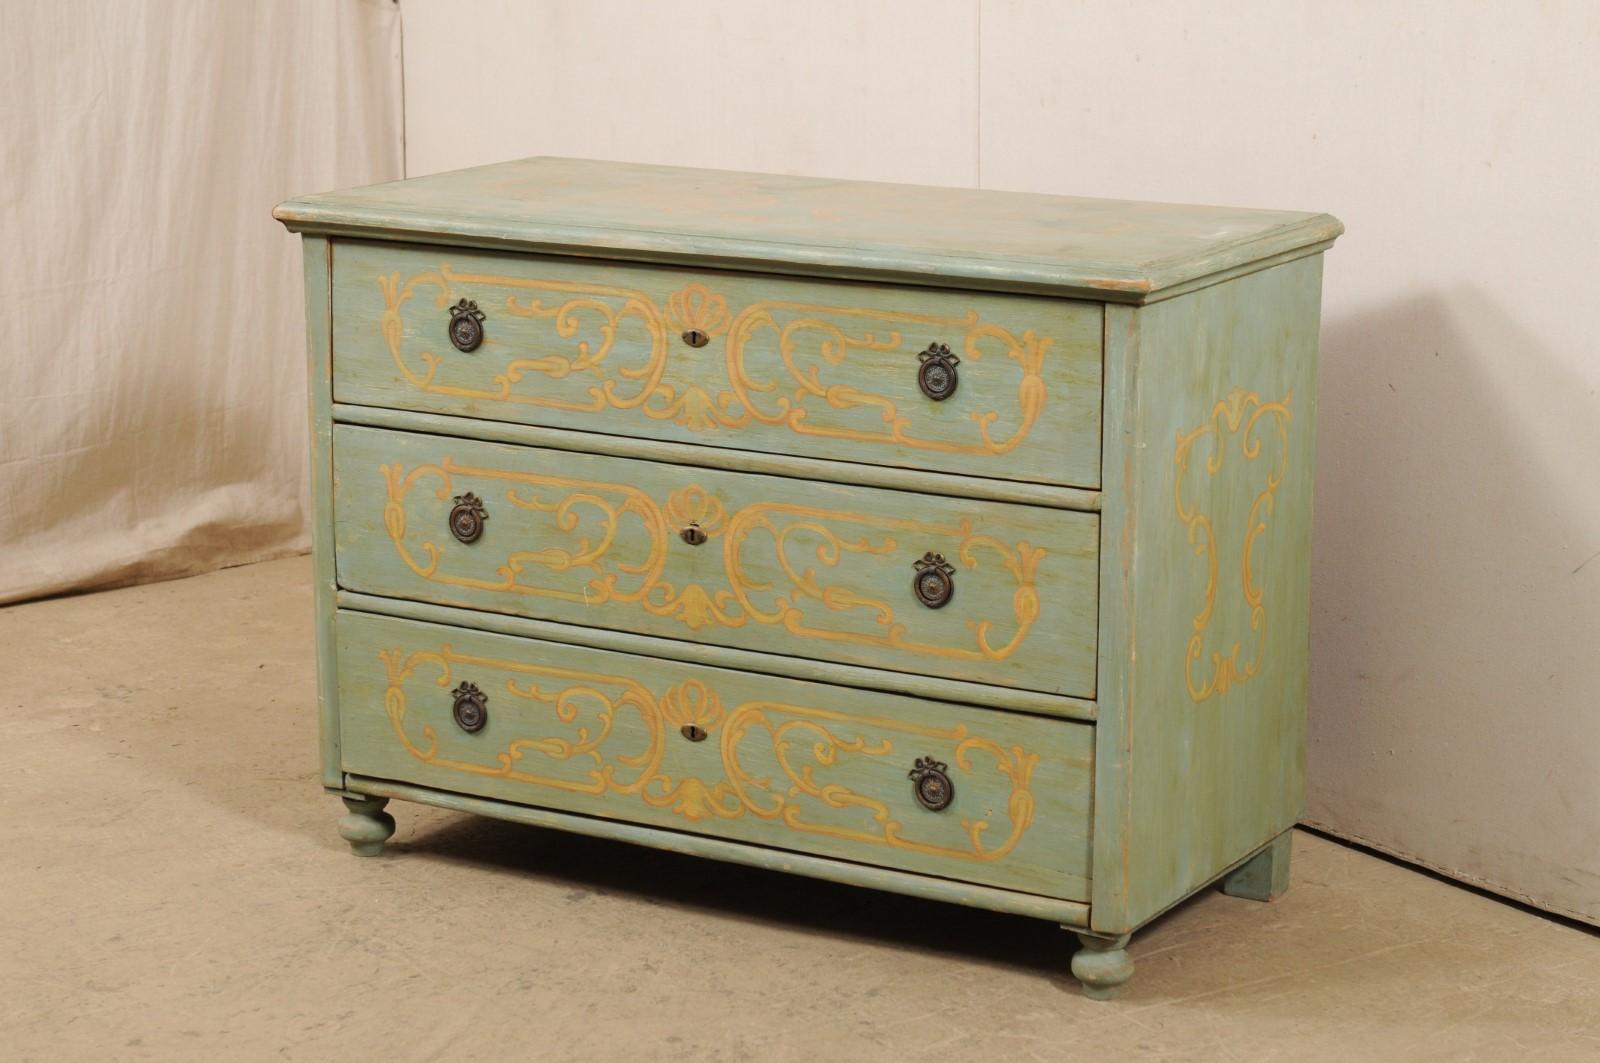 Hand-Painted European Chest with Hand Painted Neoclassical-Inspired Decor and Faux Marble Top